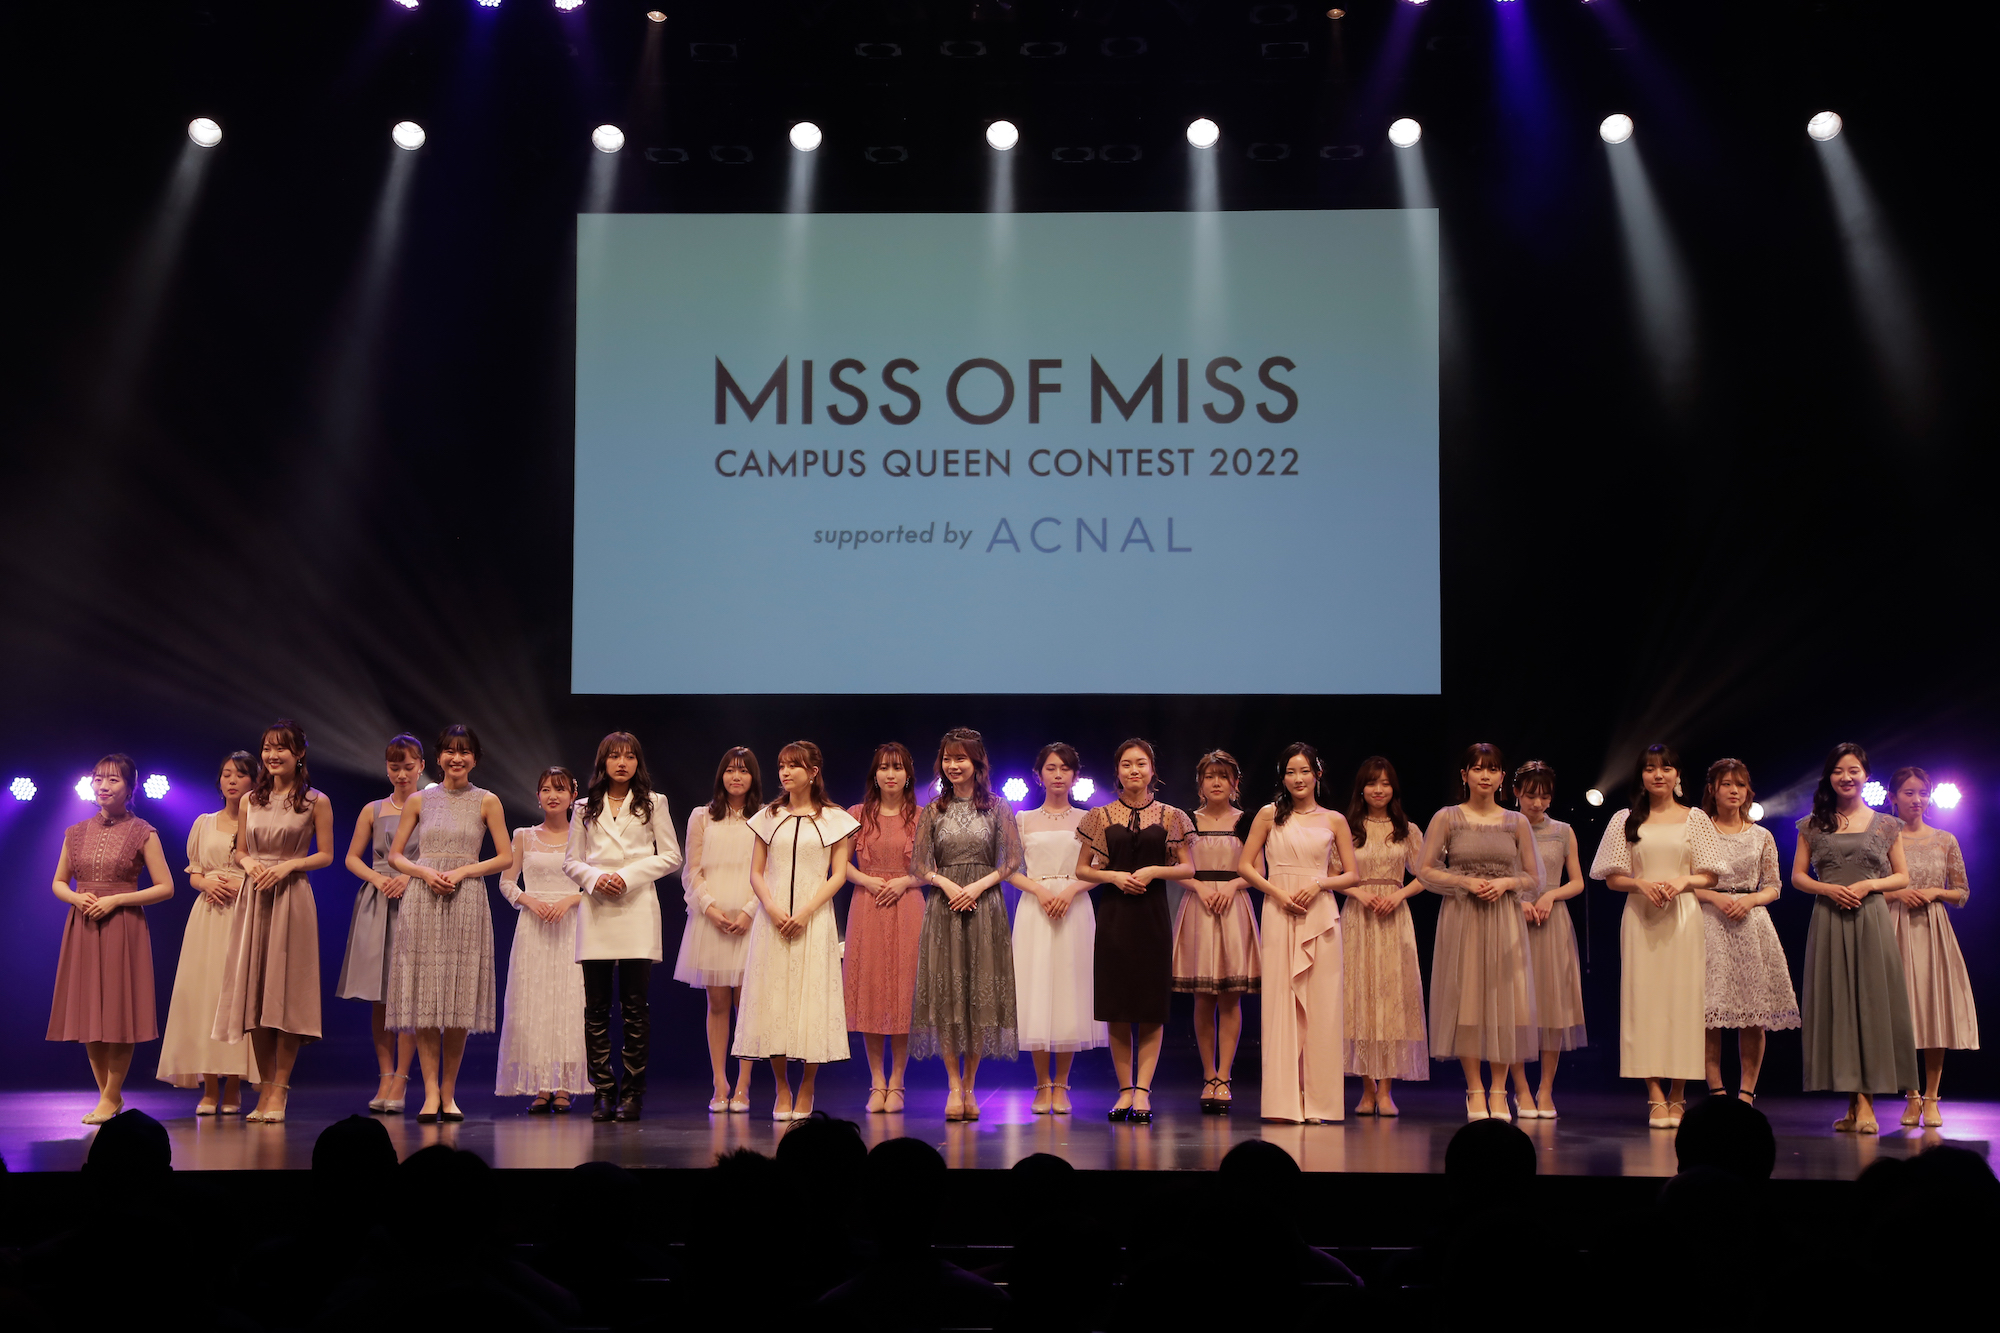 MISS OF MISS CAMPUS QUEEN CONTEST 2022 ファイナリスト